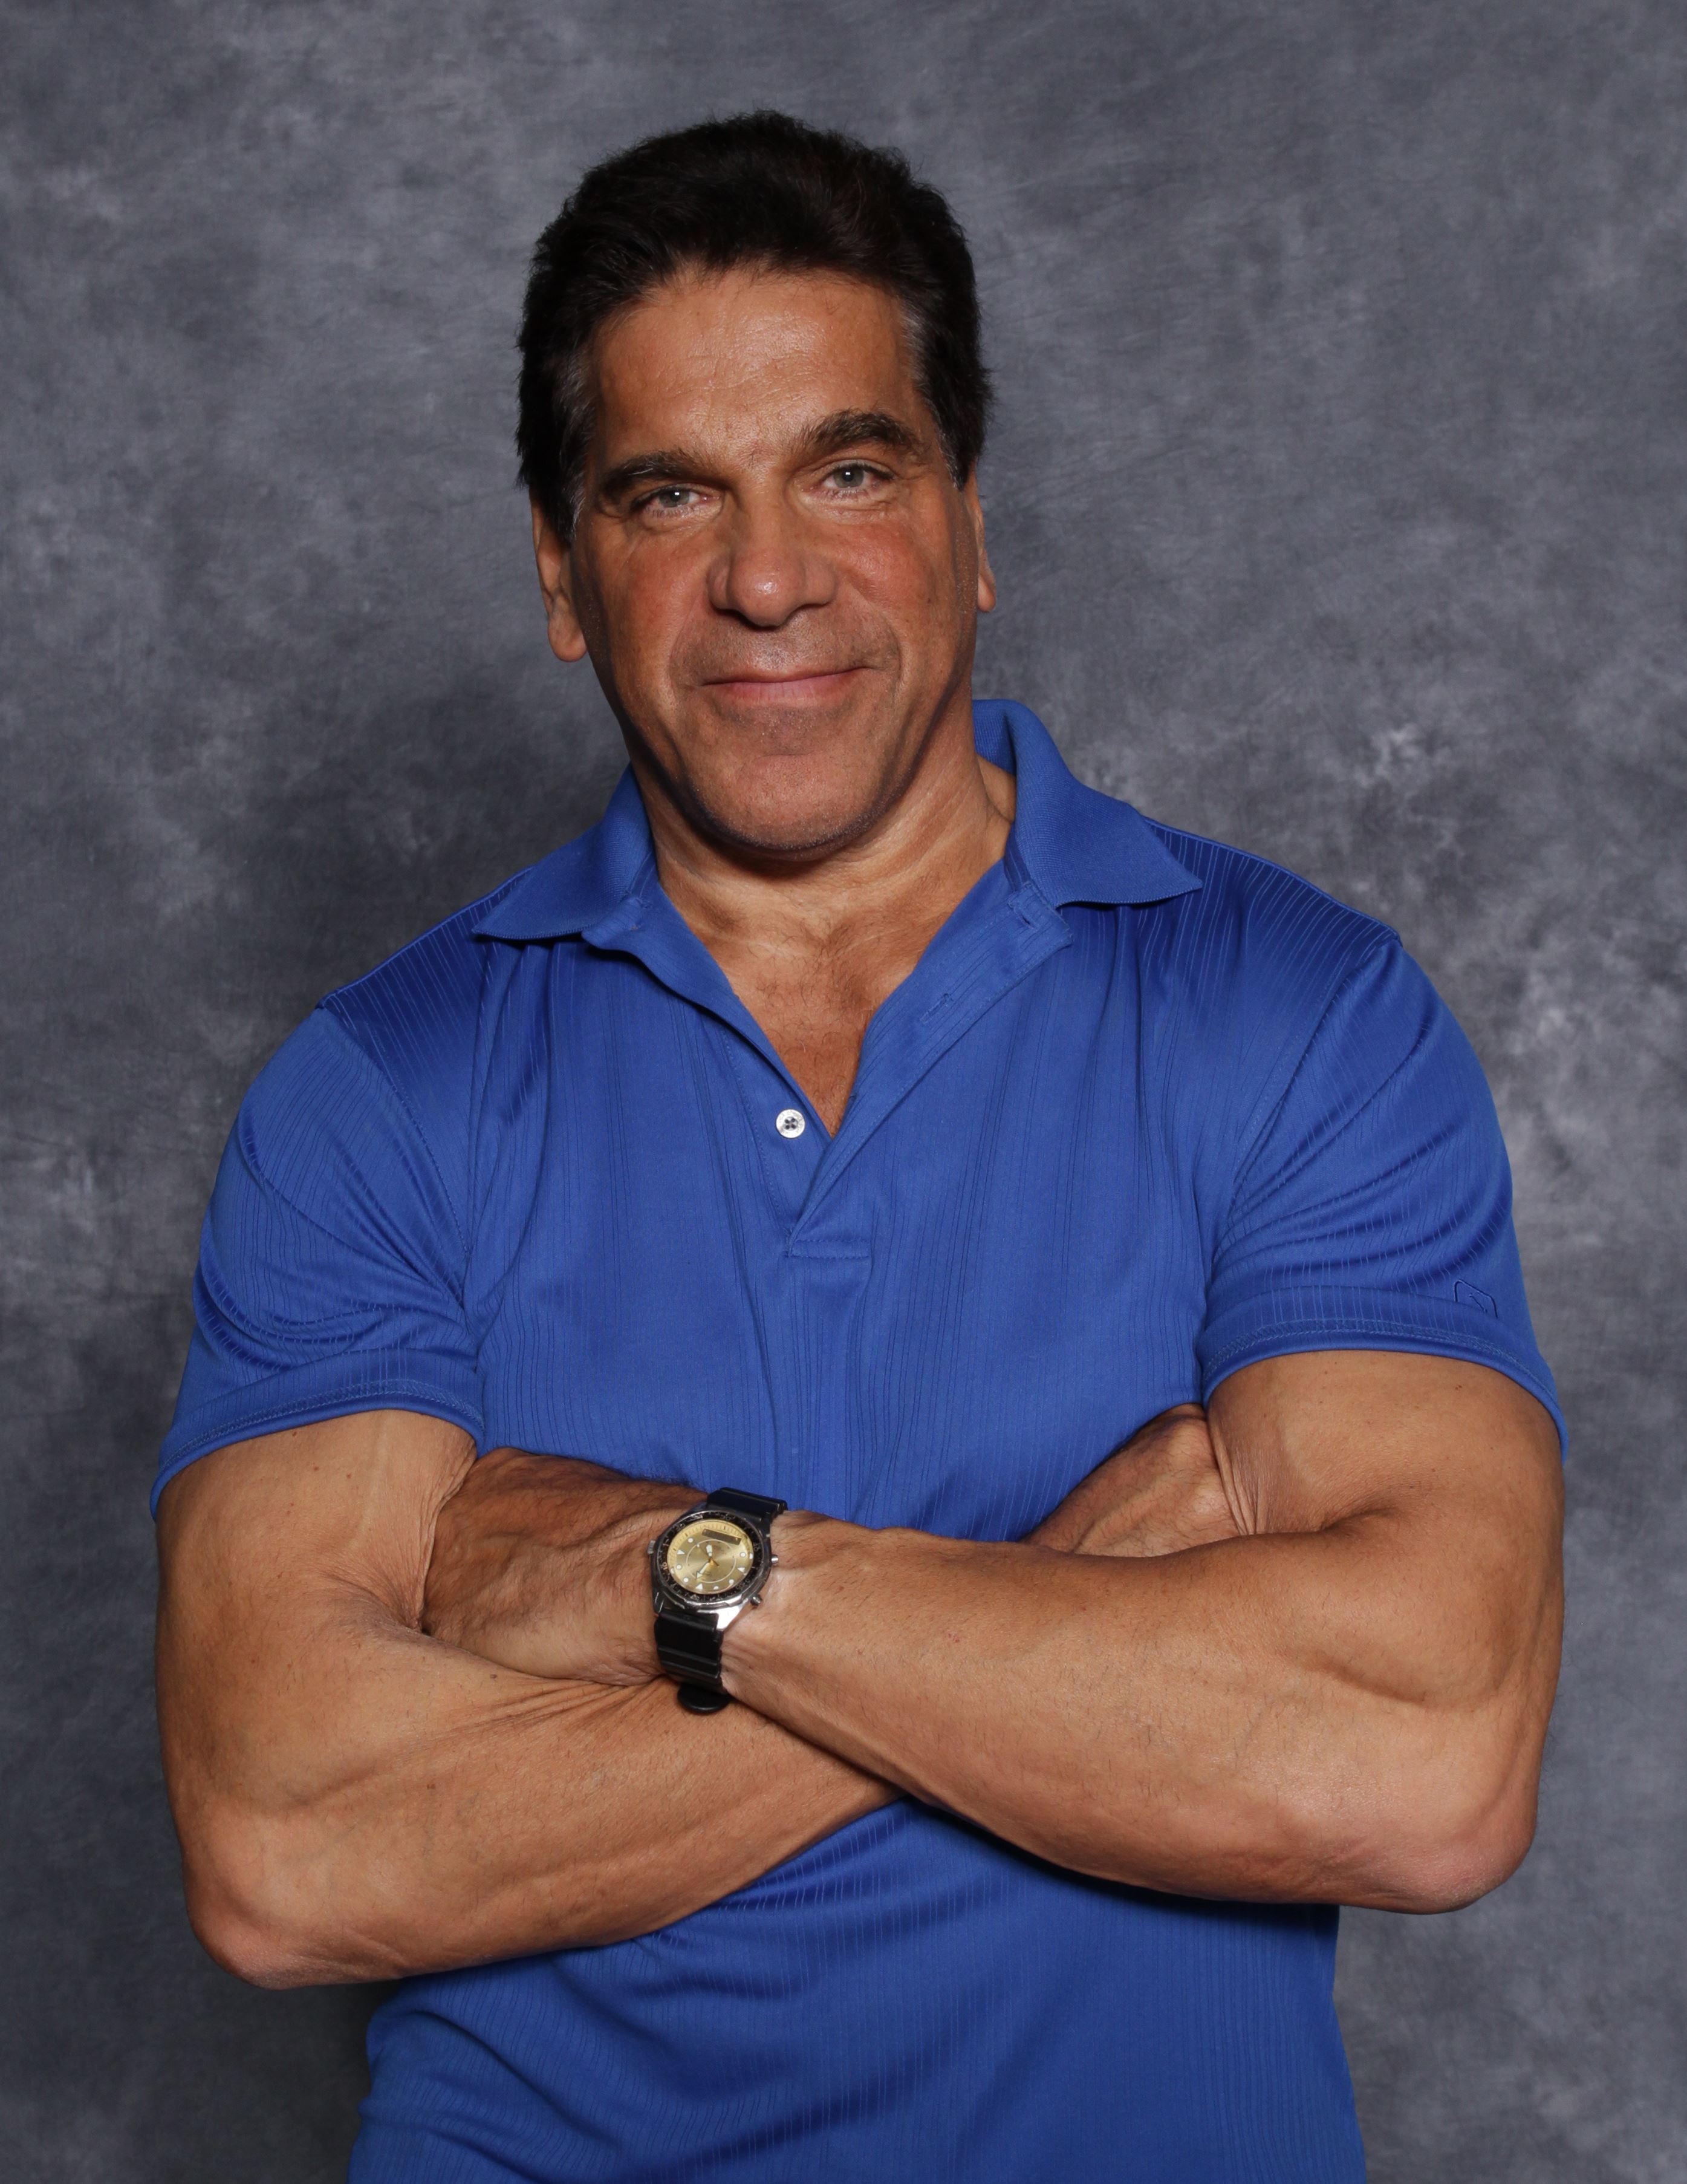 More Pictures Of Lou Ferrigno. 